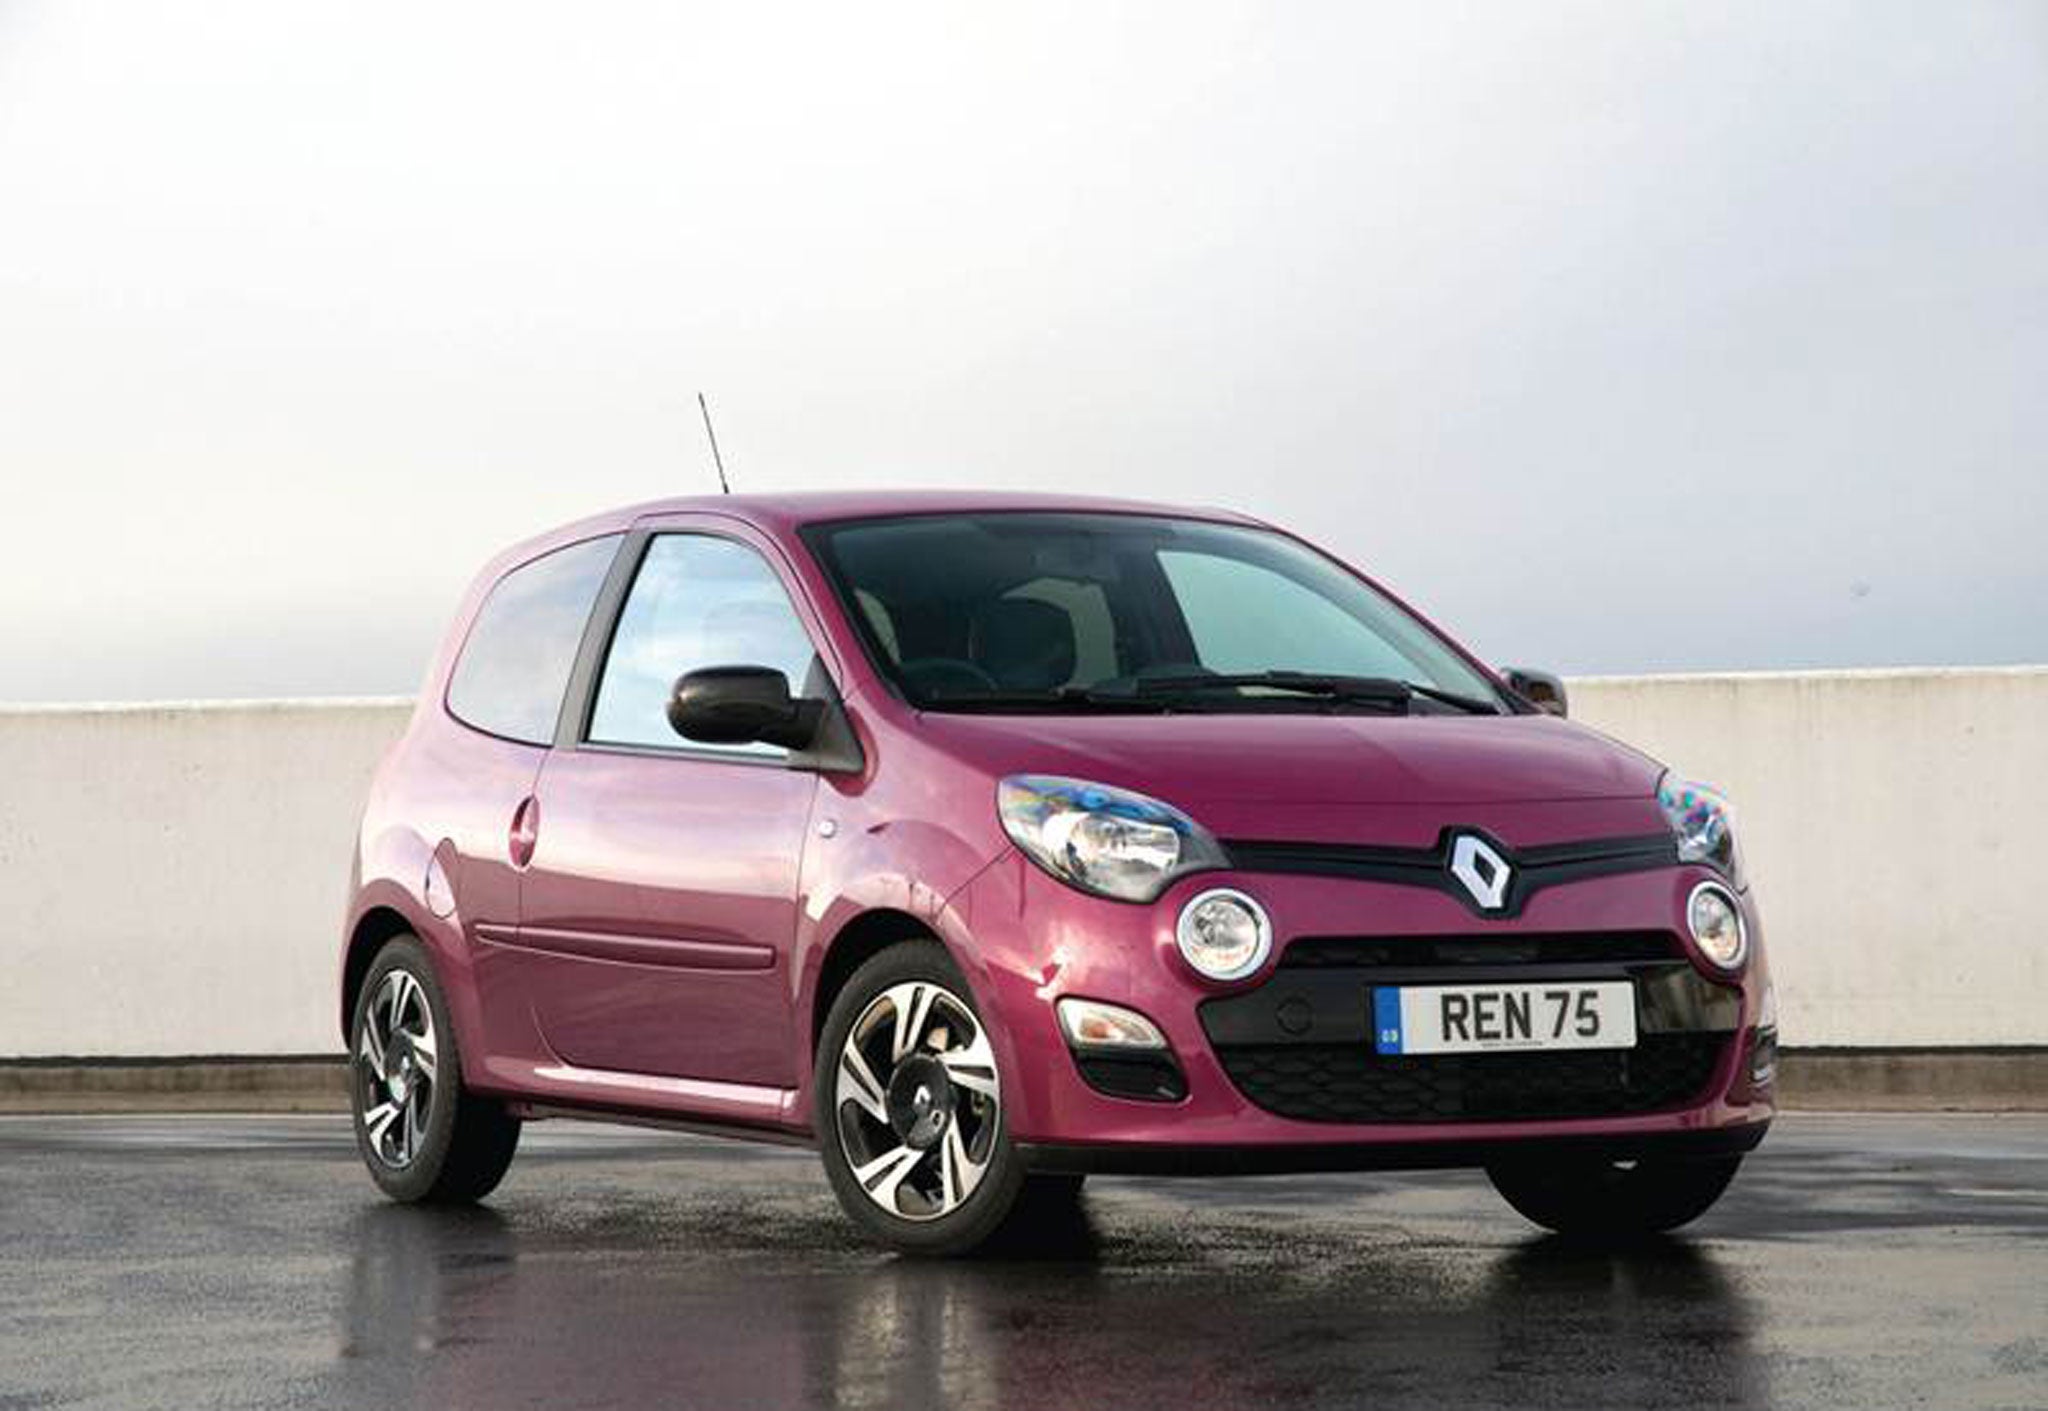 The Twingo is for 'active lady drivers who need to get about town but who are also attentive to fashion and looks,' Renault said